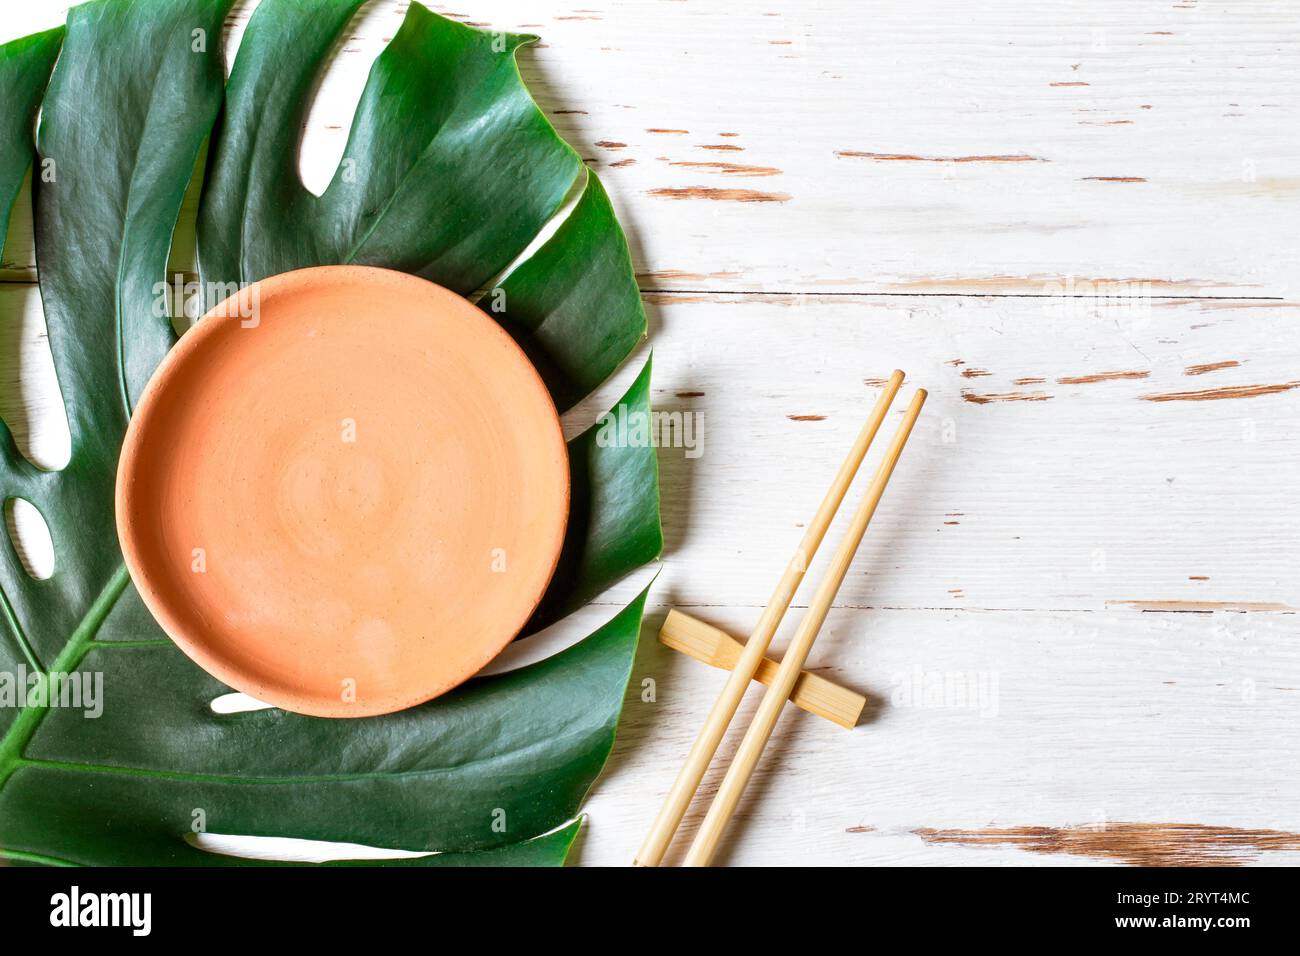 Table setting Chopstick and ceramic handmade dish. Asian food concept. Stock Photo